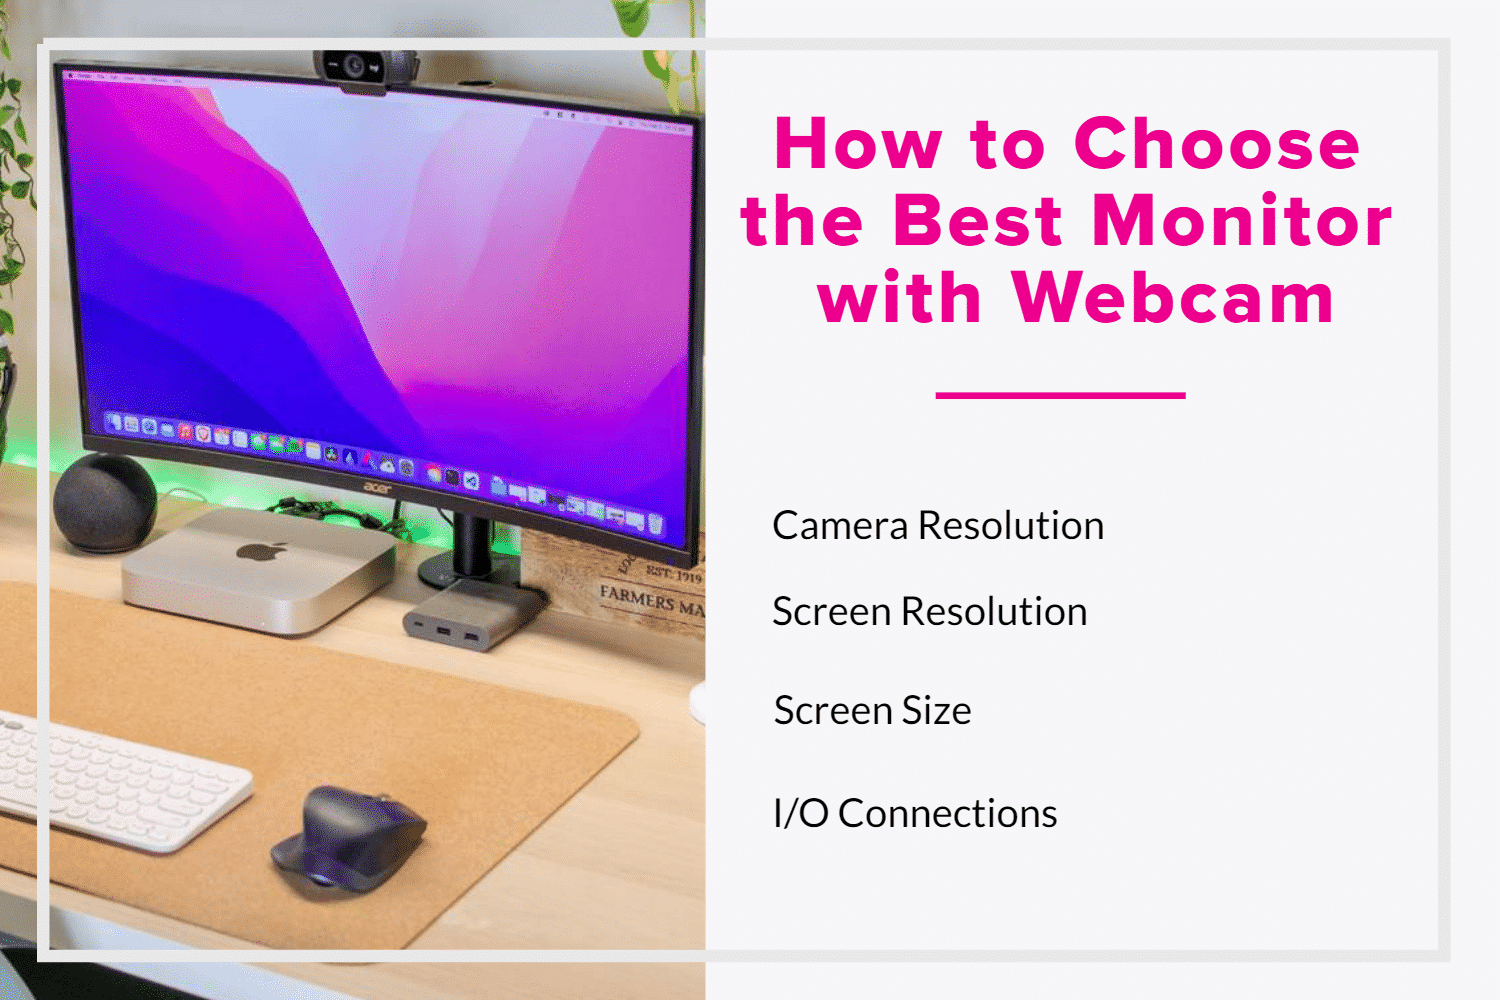 How to Choose the Best Monitor with Webcam